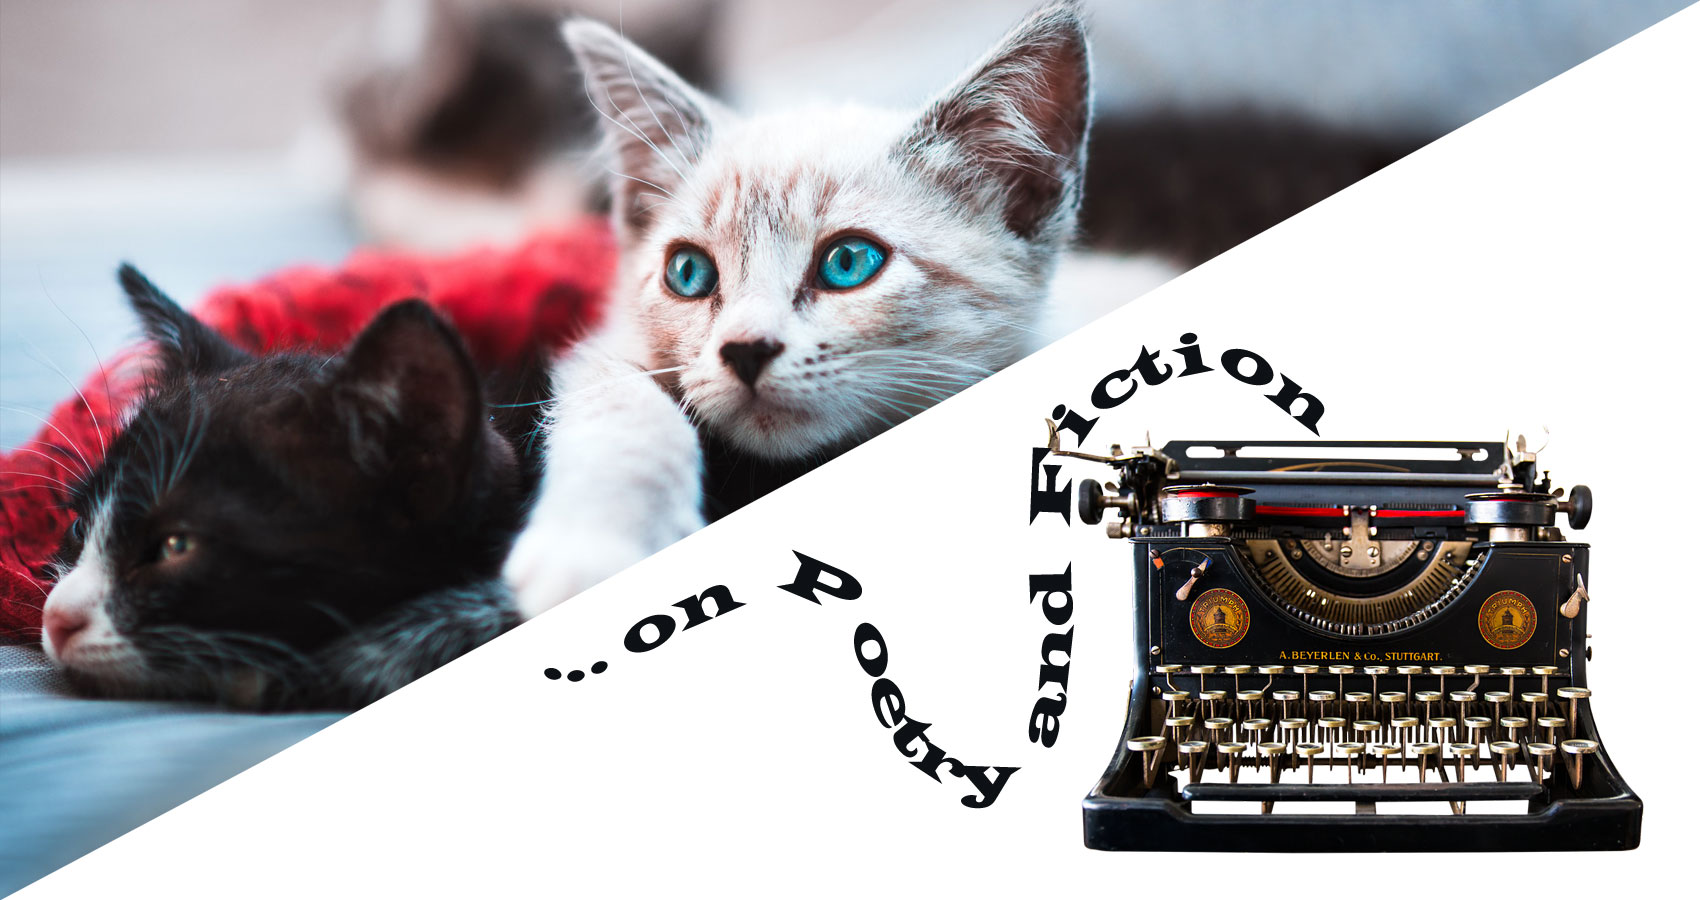 ...on Poetry and Fiction - Just “One Word” Away ("Cats"), editorial by Phyllis P. Colucci at Spillwords.com